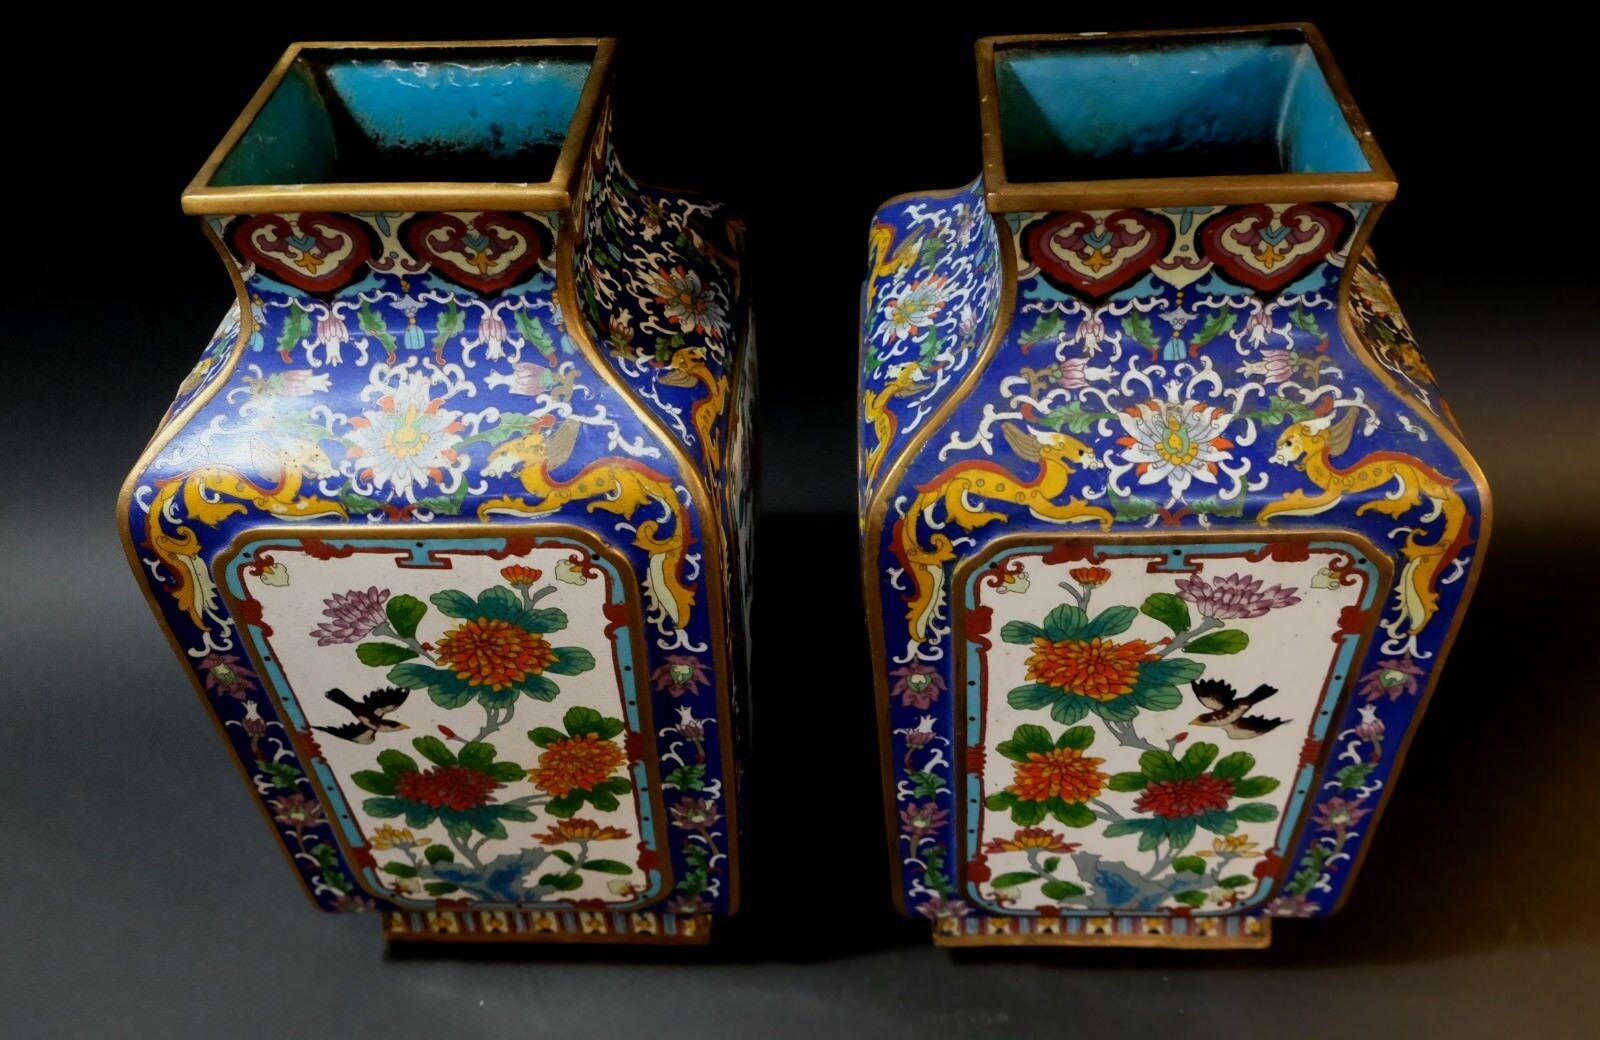 Large Matching Pair of Chinese Bronze Cloisonné Enameled Vases In Good Condition For Sale In Norton, MA